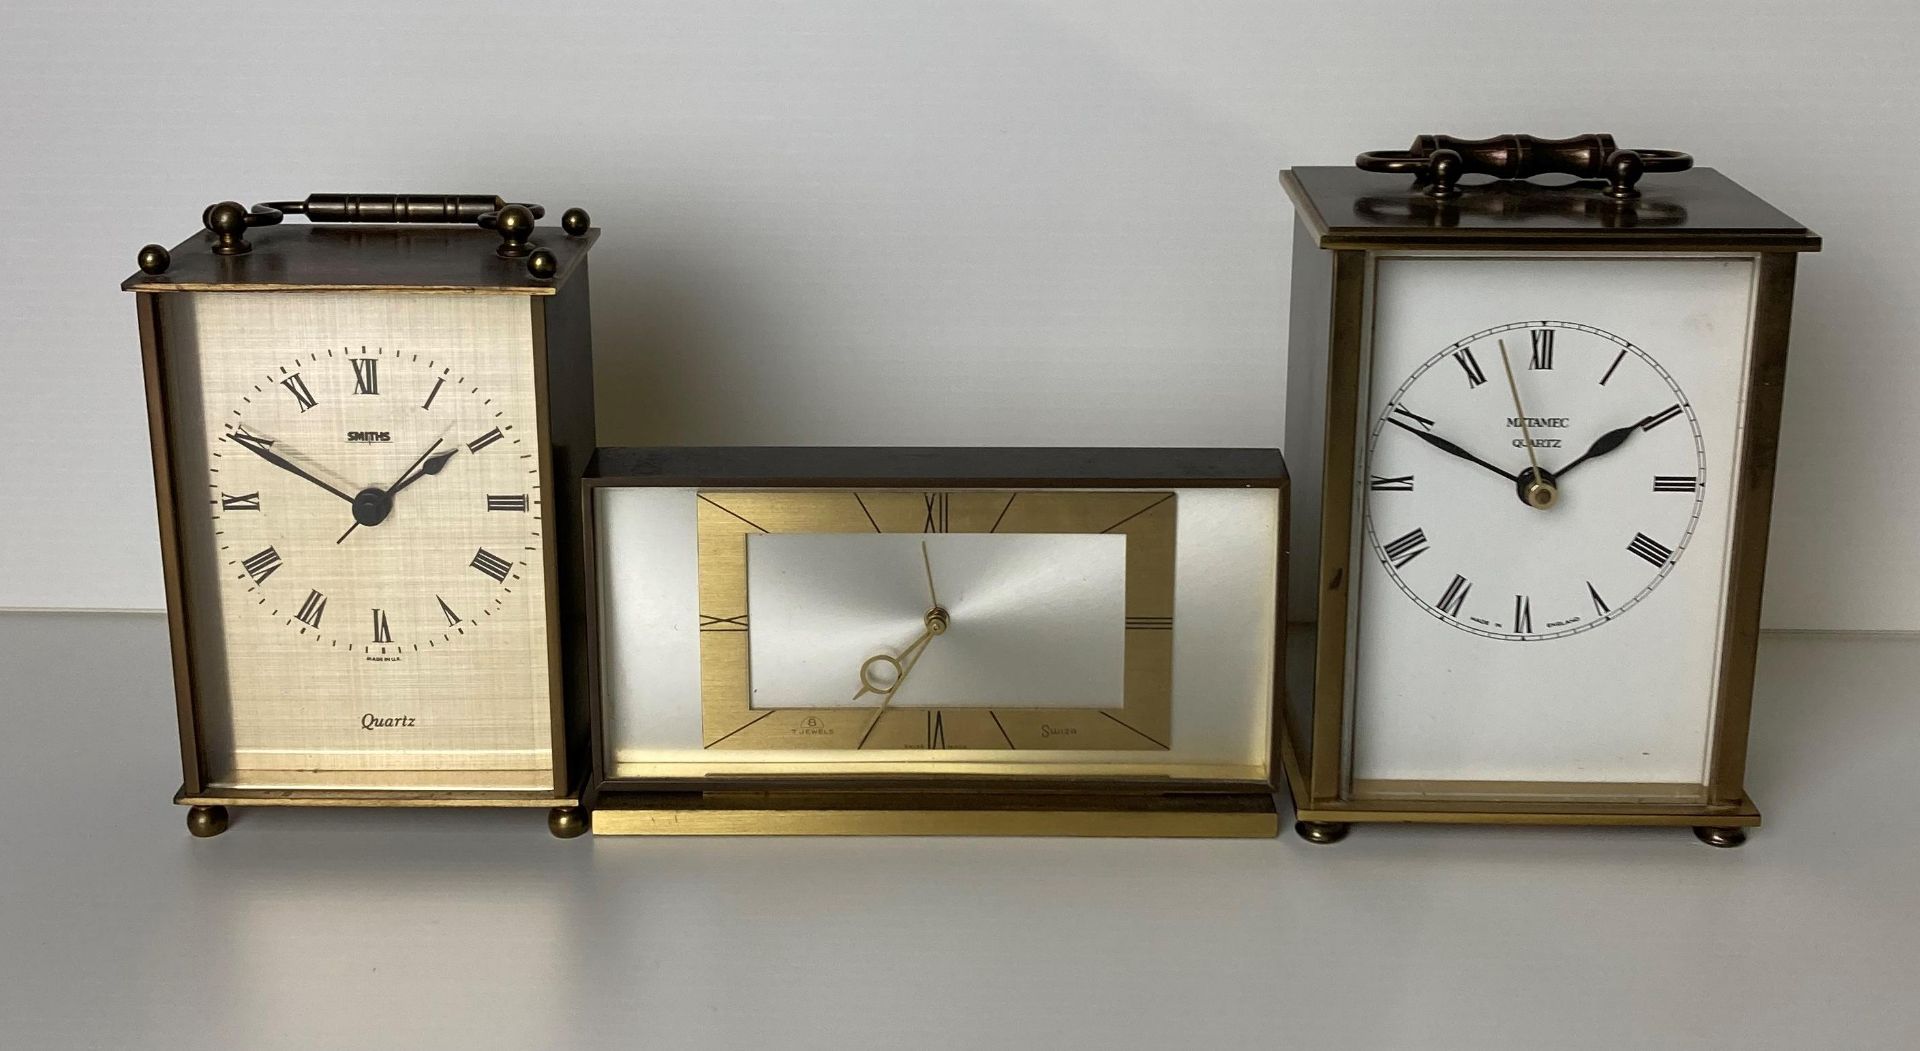 Three clocks including two carriage clocks by Smiths & Metamel and a Swiza 8 7 Jewels clock